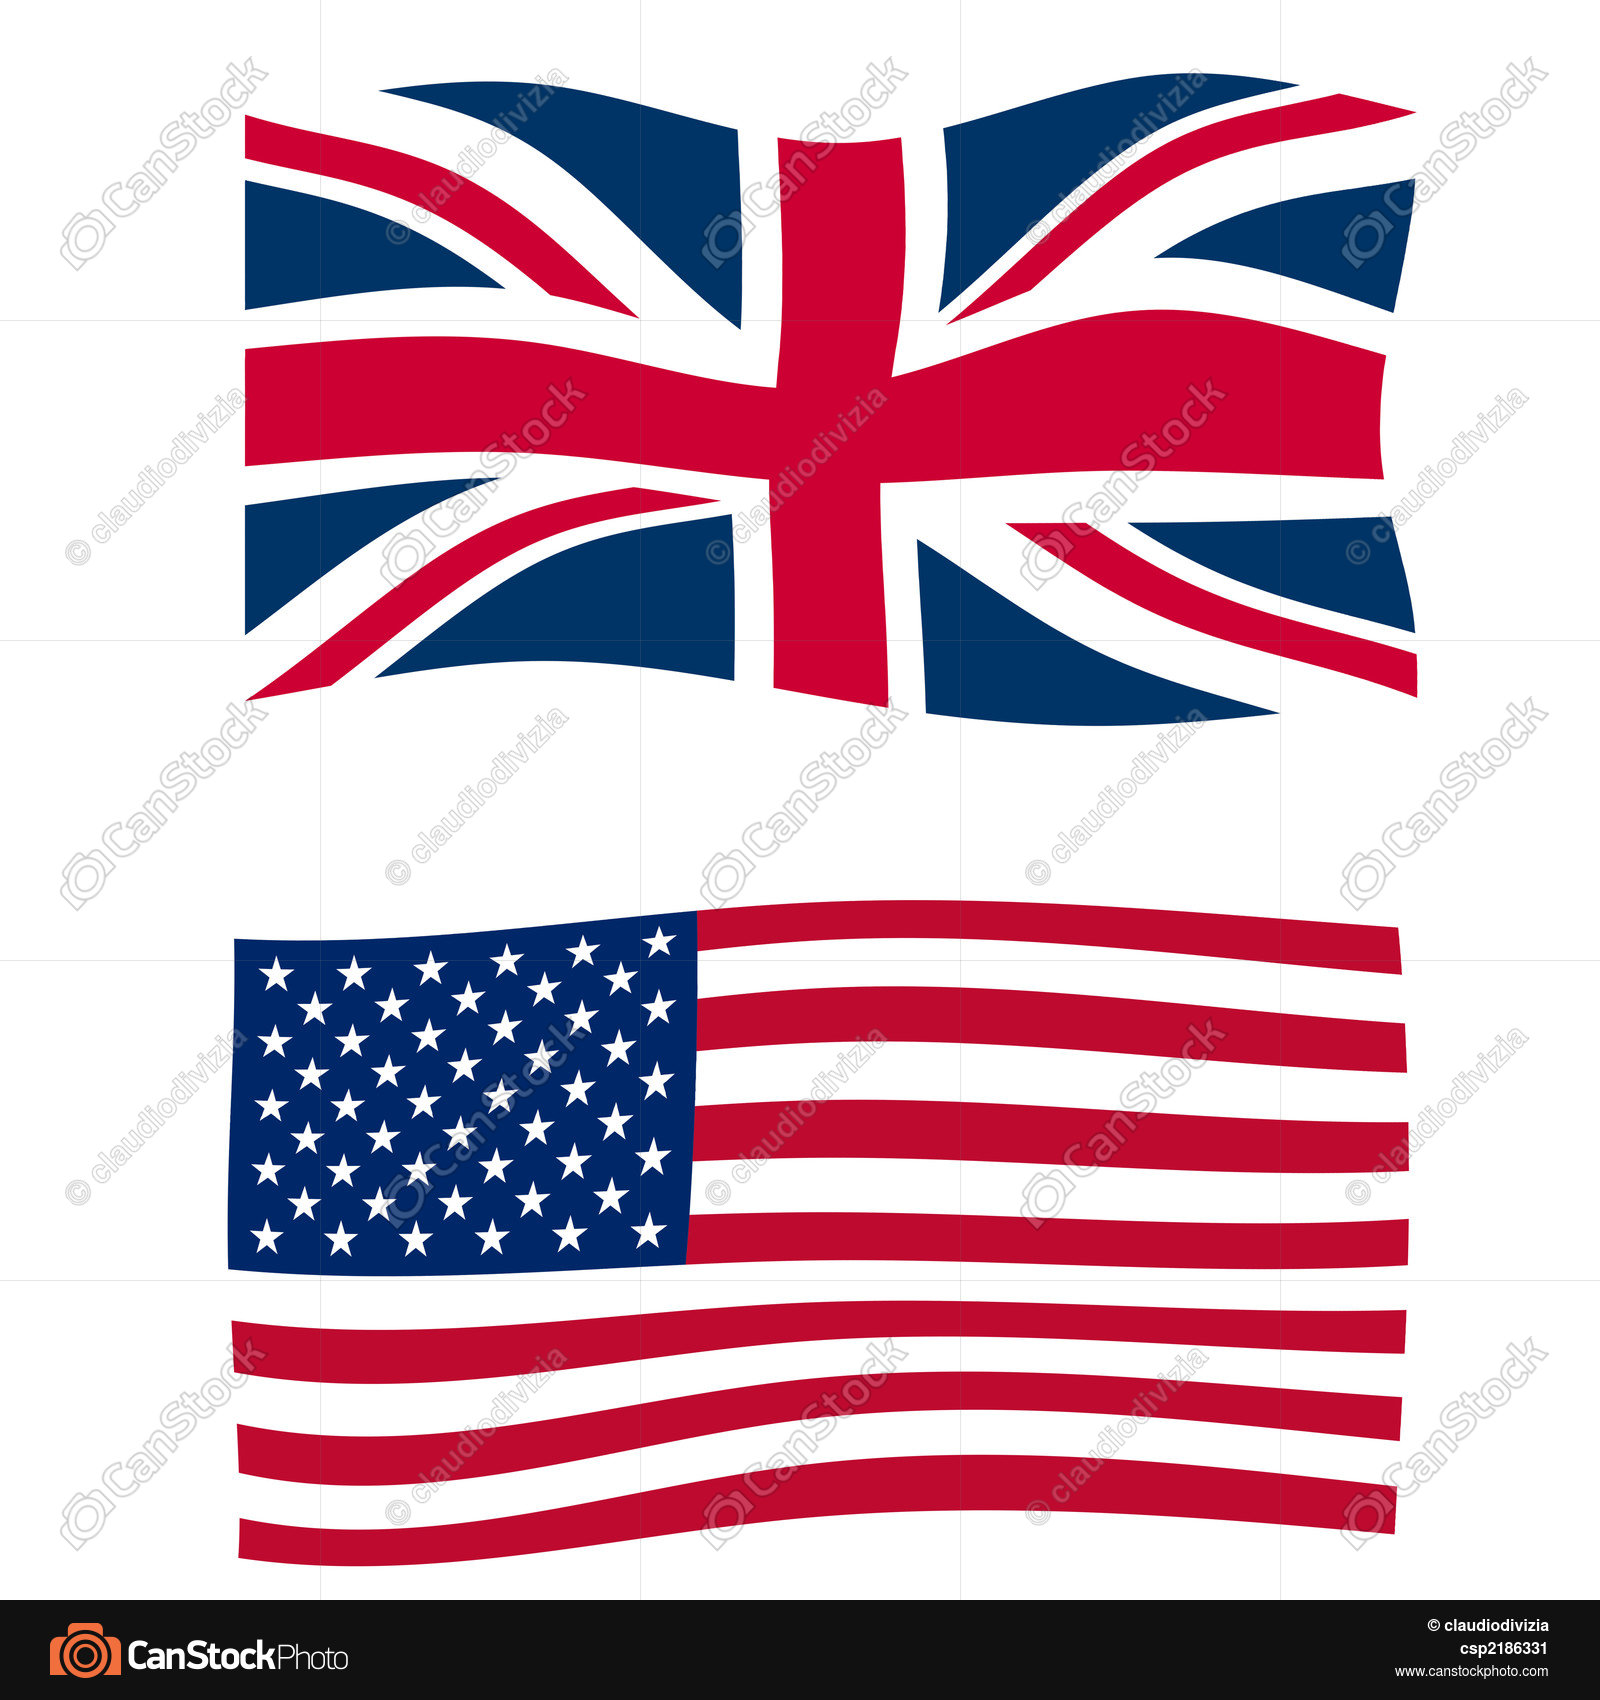 Rippled union jack flags of the uk and usa clipart - Search ...